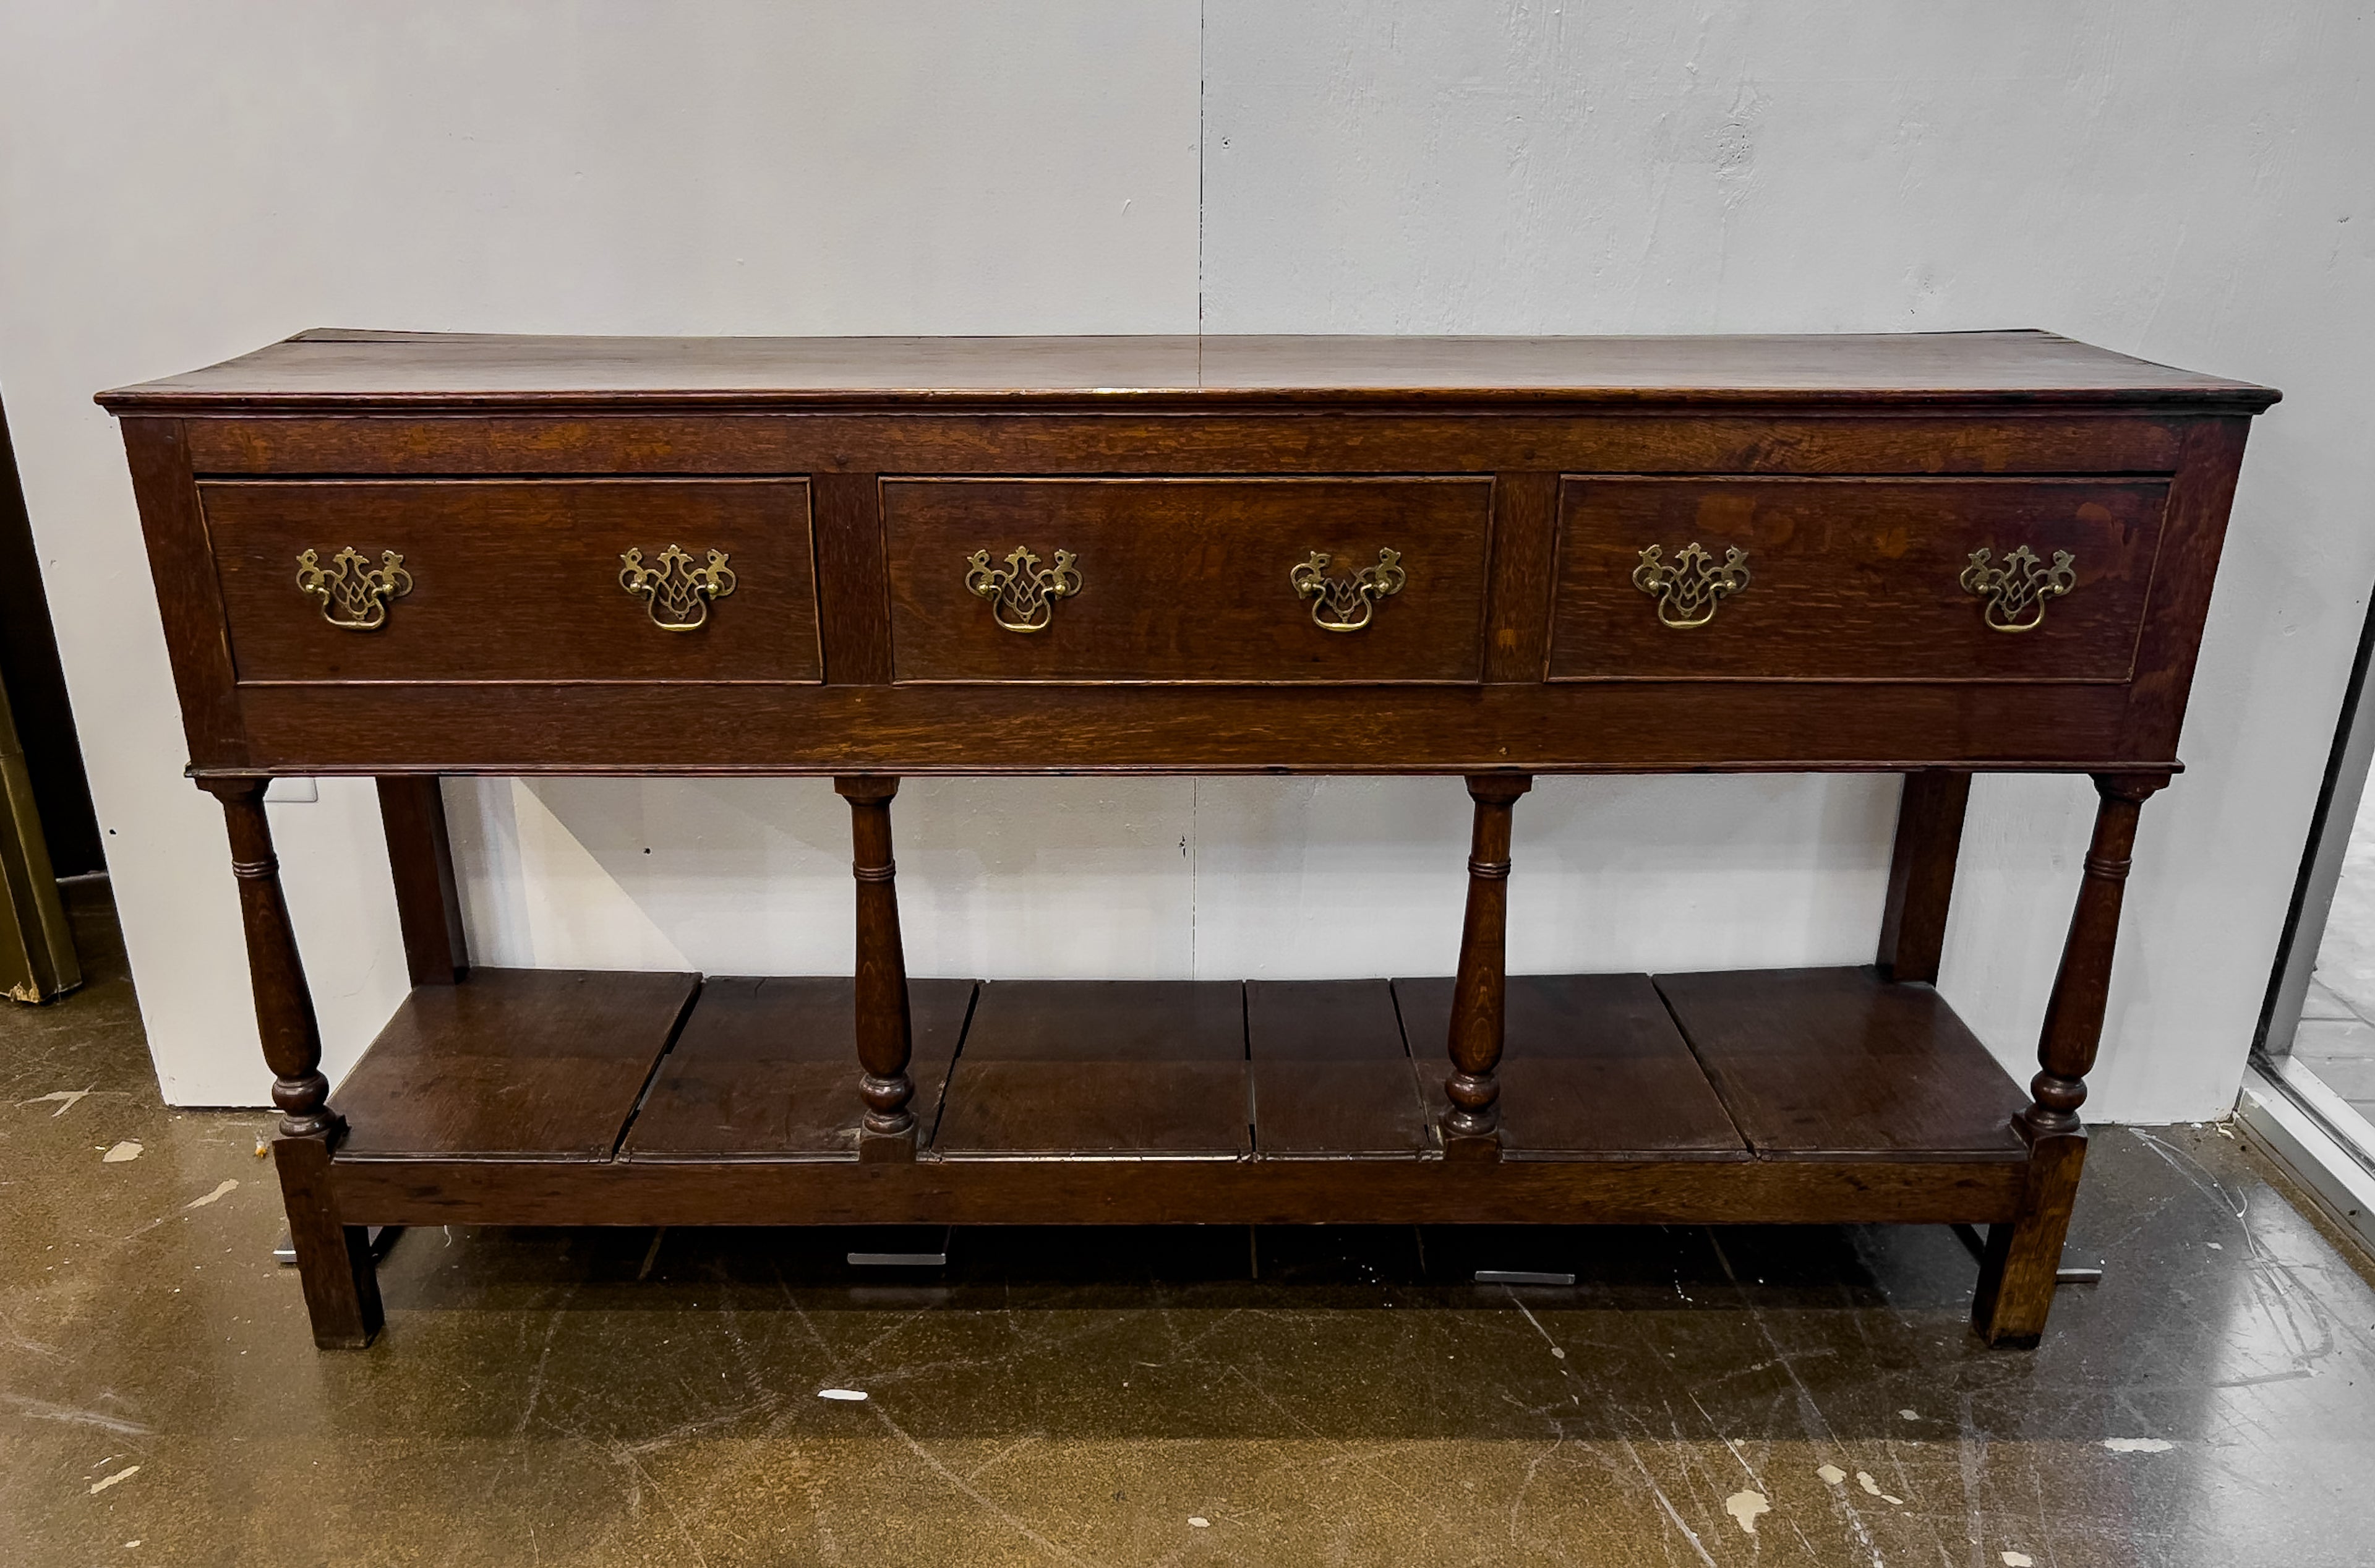 18th Century English Oak Sideboard with turned front legs and 3 drawers. This piece is made from peg construction, dovetailed drawers and the original hardware is in tact. The top of this piece initially had another piece on top of it, however it